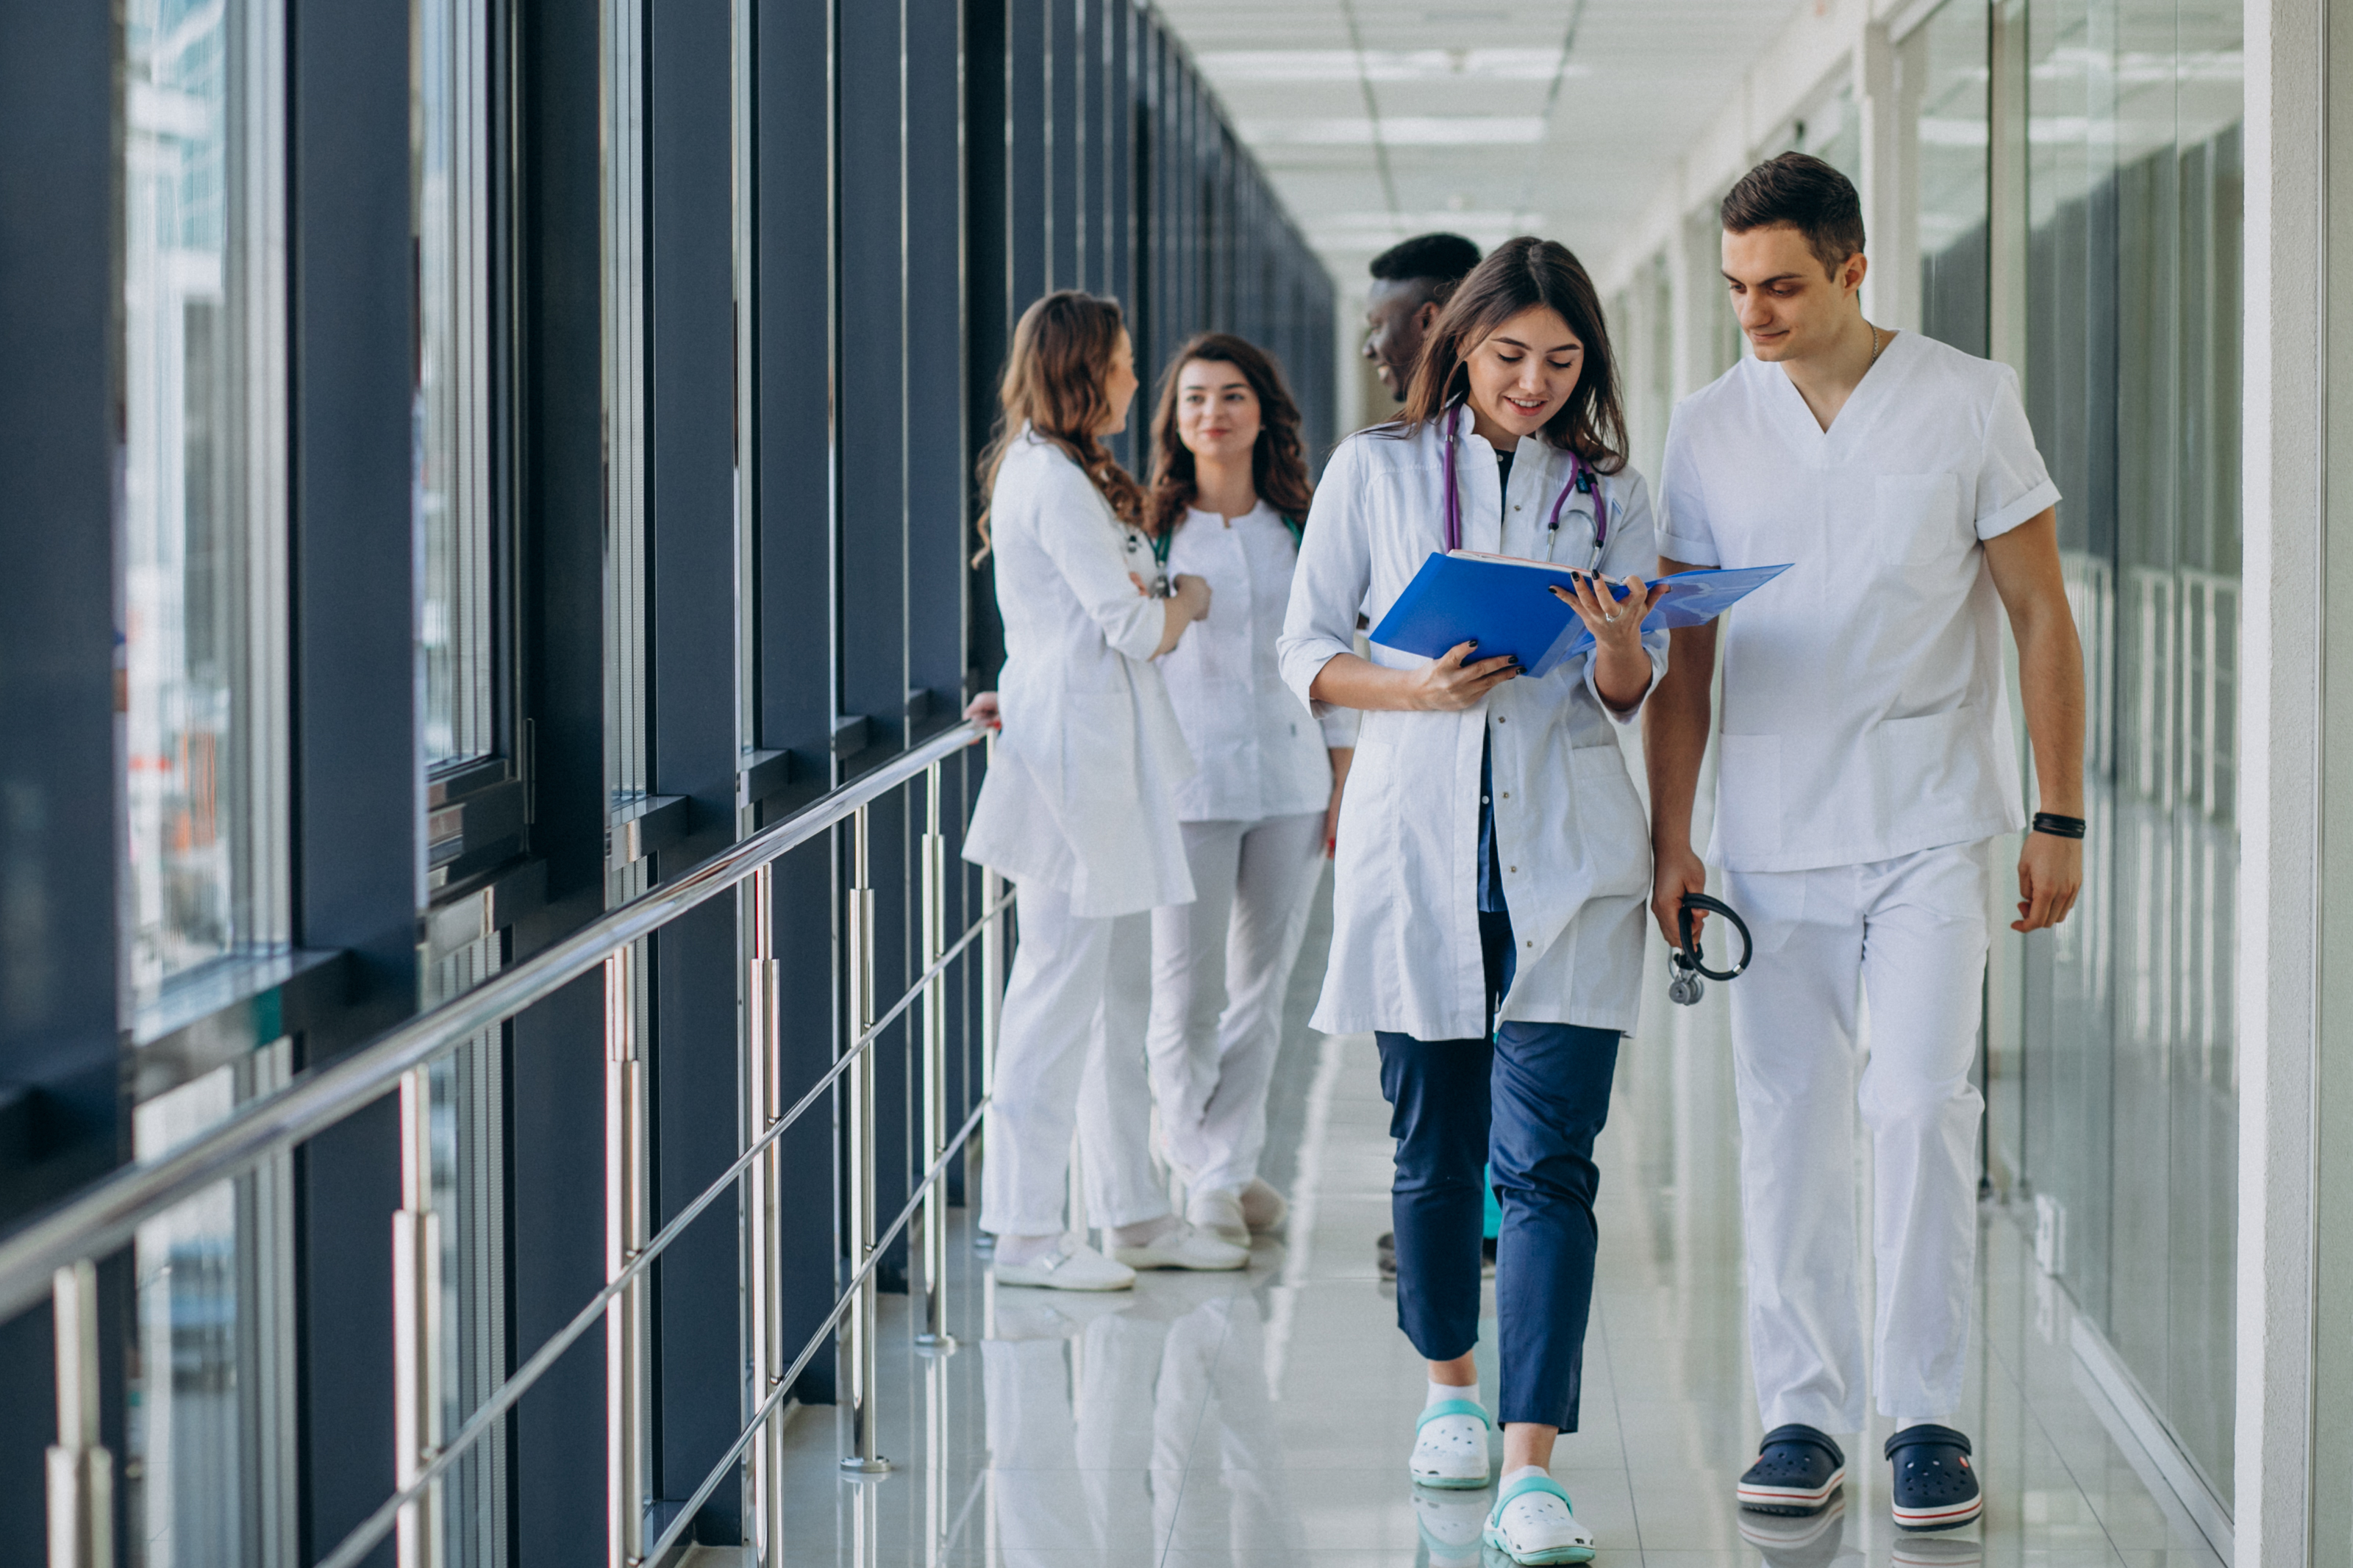 A team of healthcare professionals walking through a hospital